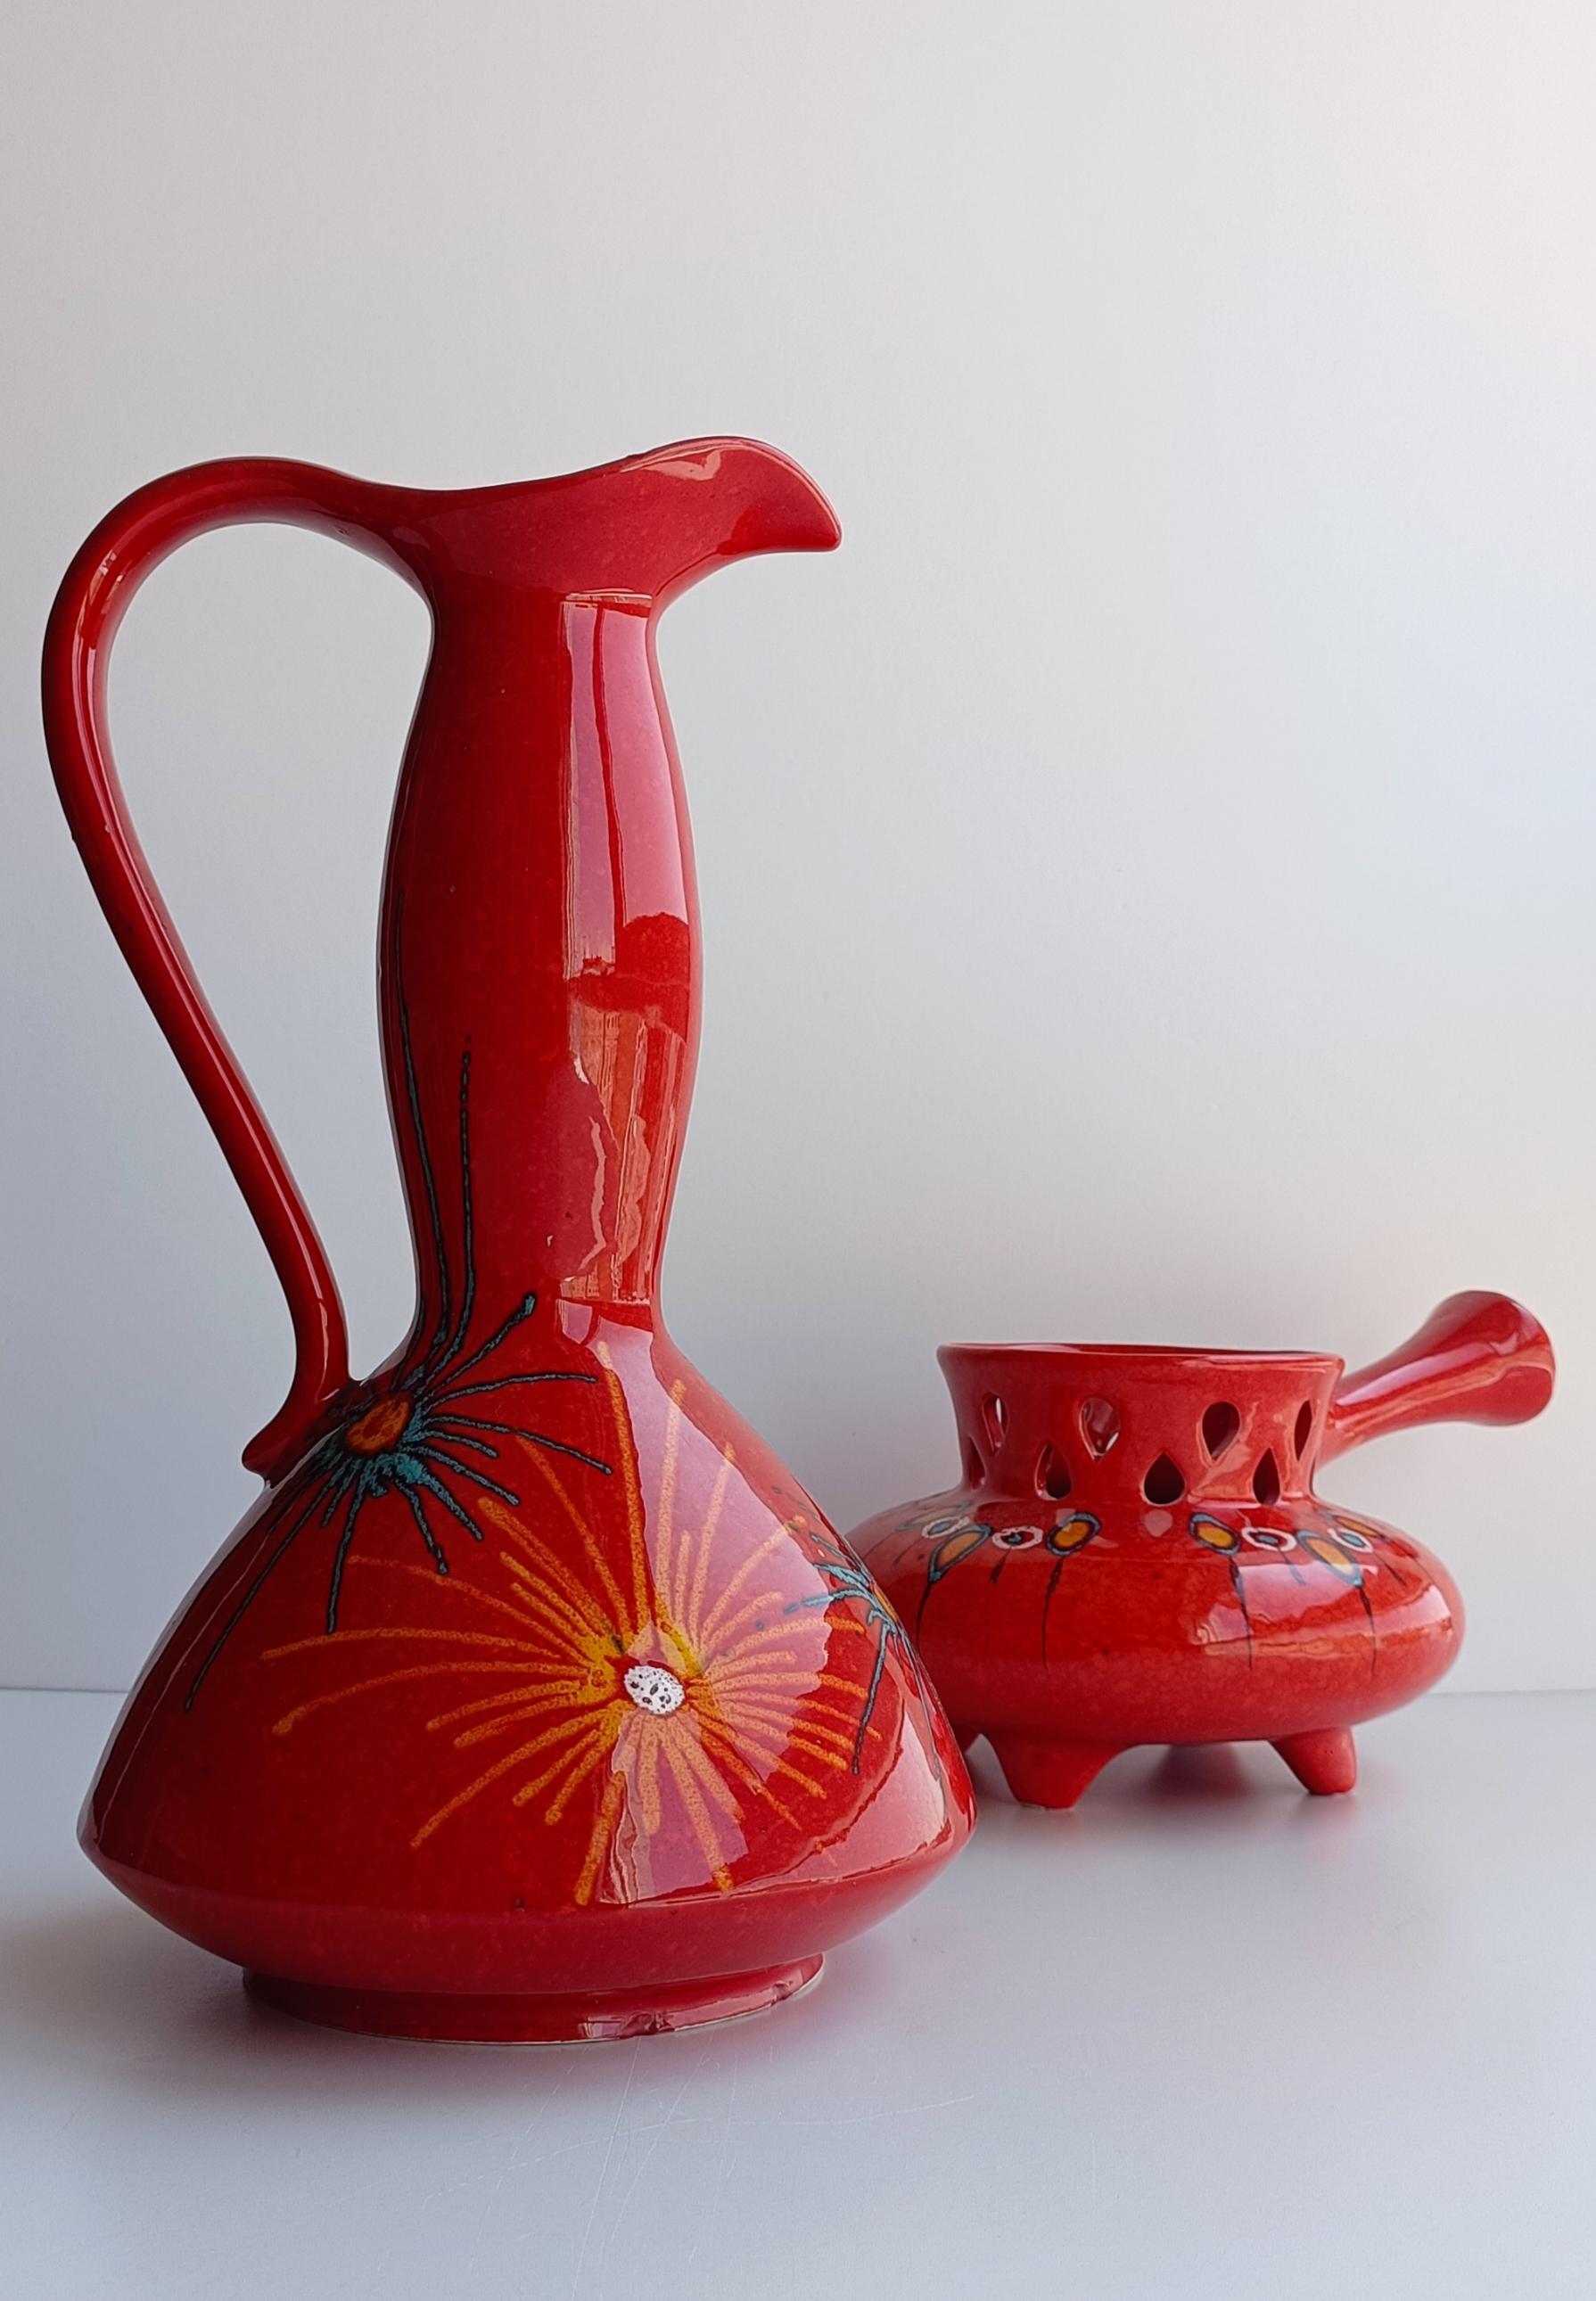 Red glaze Bertoncello Ikebana ceramic pair of vases. The glaze and design are just stunning. In perfect flawless condition. Collector's pieces.

Measurements:

Pitcher:
Height 30cm/ 11.75in
Width 18/ 7.25in
Perimeter 53cm/ 21in (that being all the